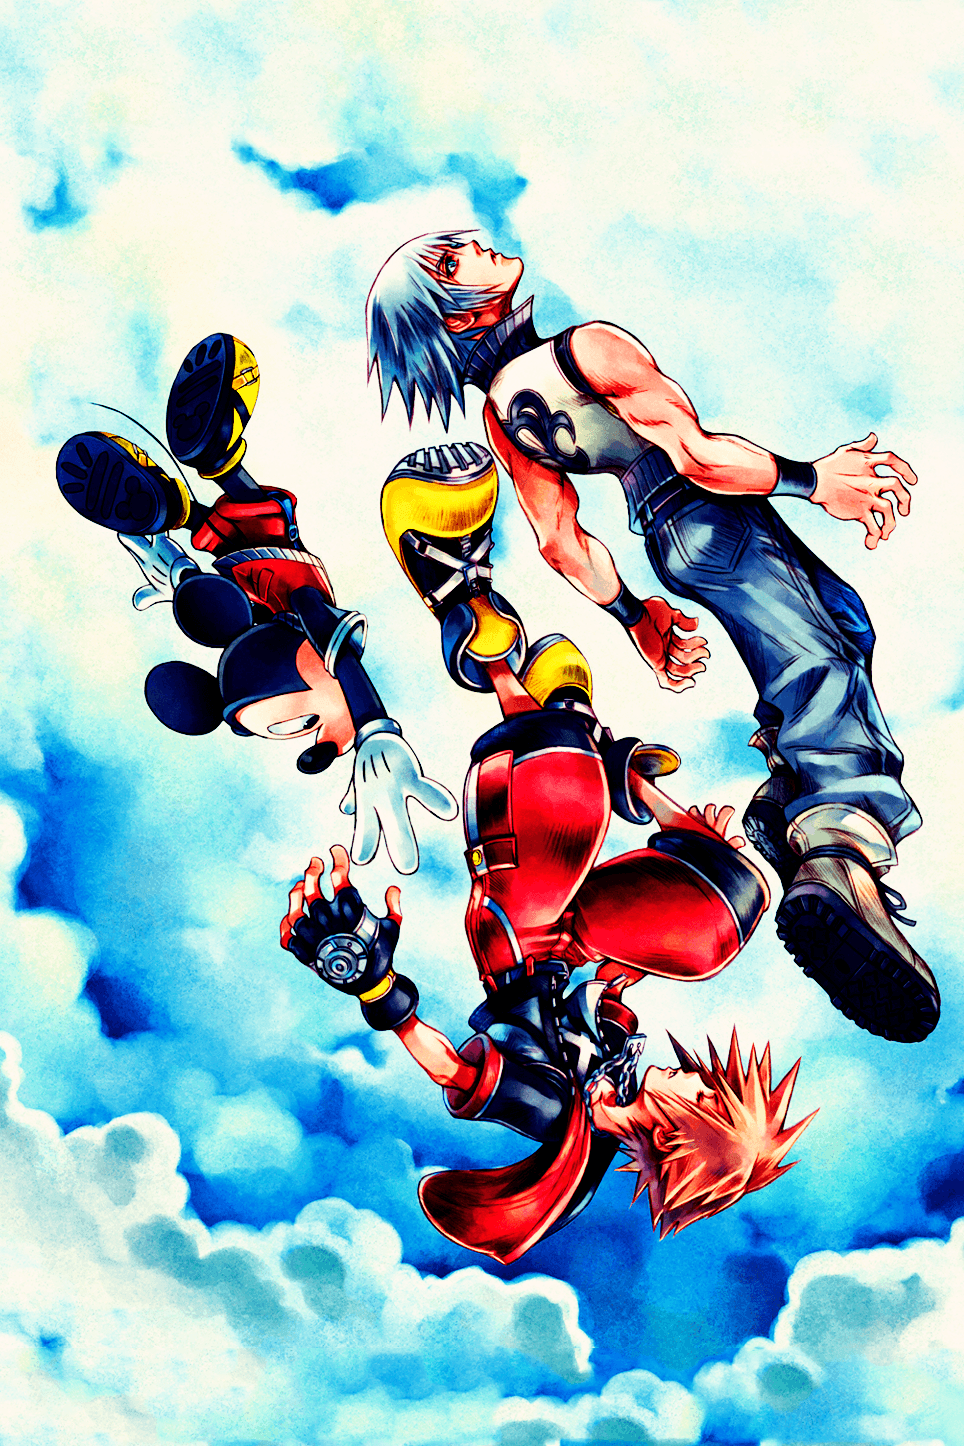 Kingdom Hearts Mobile Wallpapers Top Free Kingdom Hearts Mobile Backgrounds Wallpaperaccess